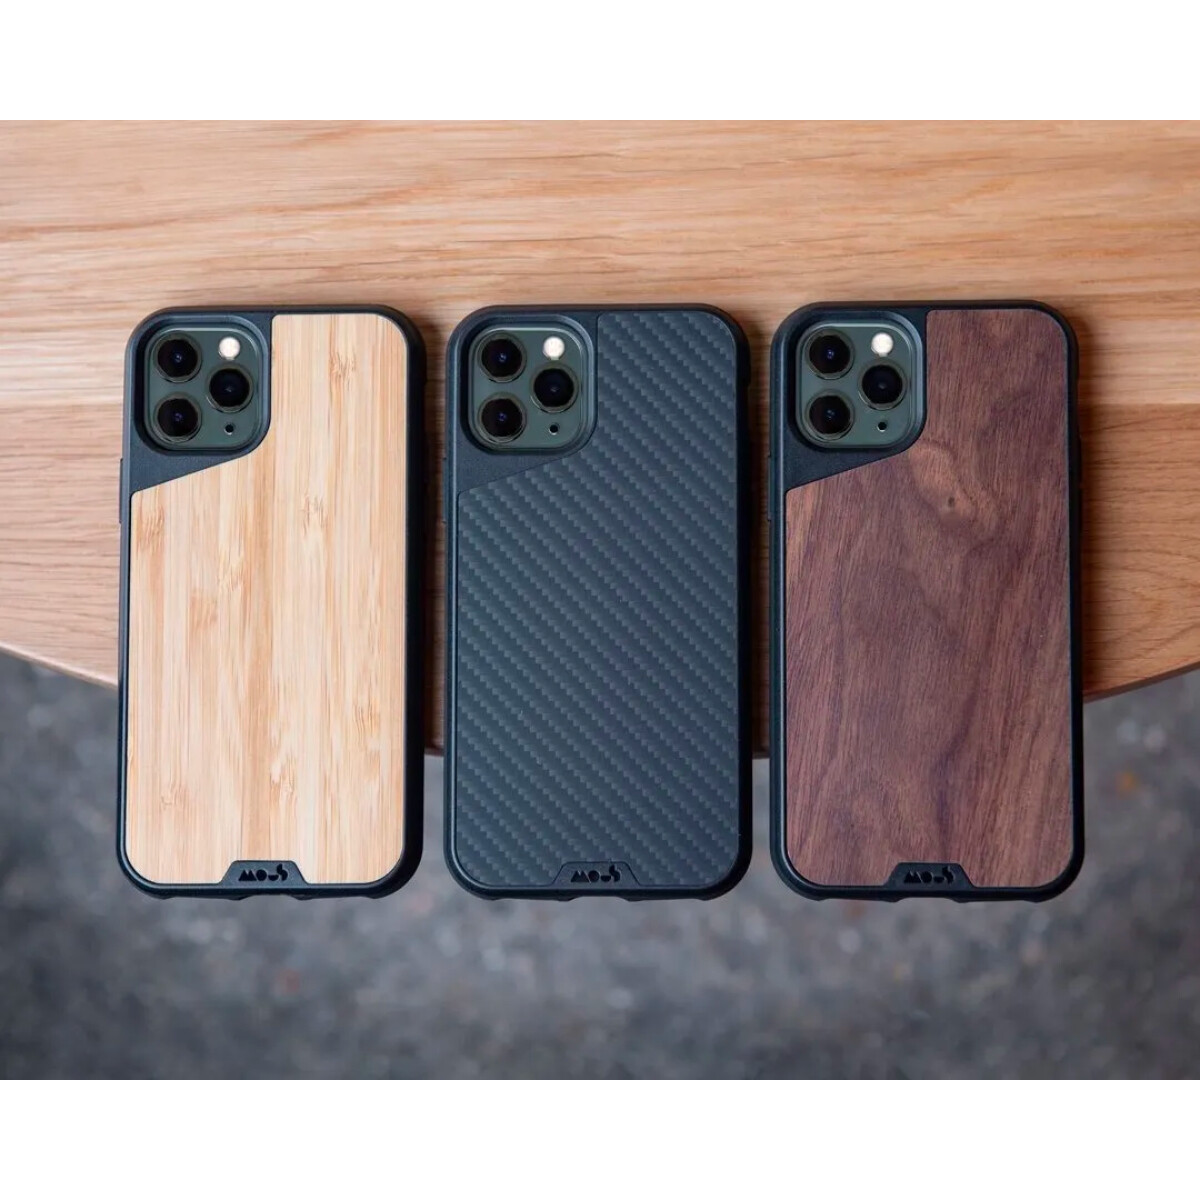 Mous case limitless 3.0 iphone 12 mini Bamboo